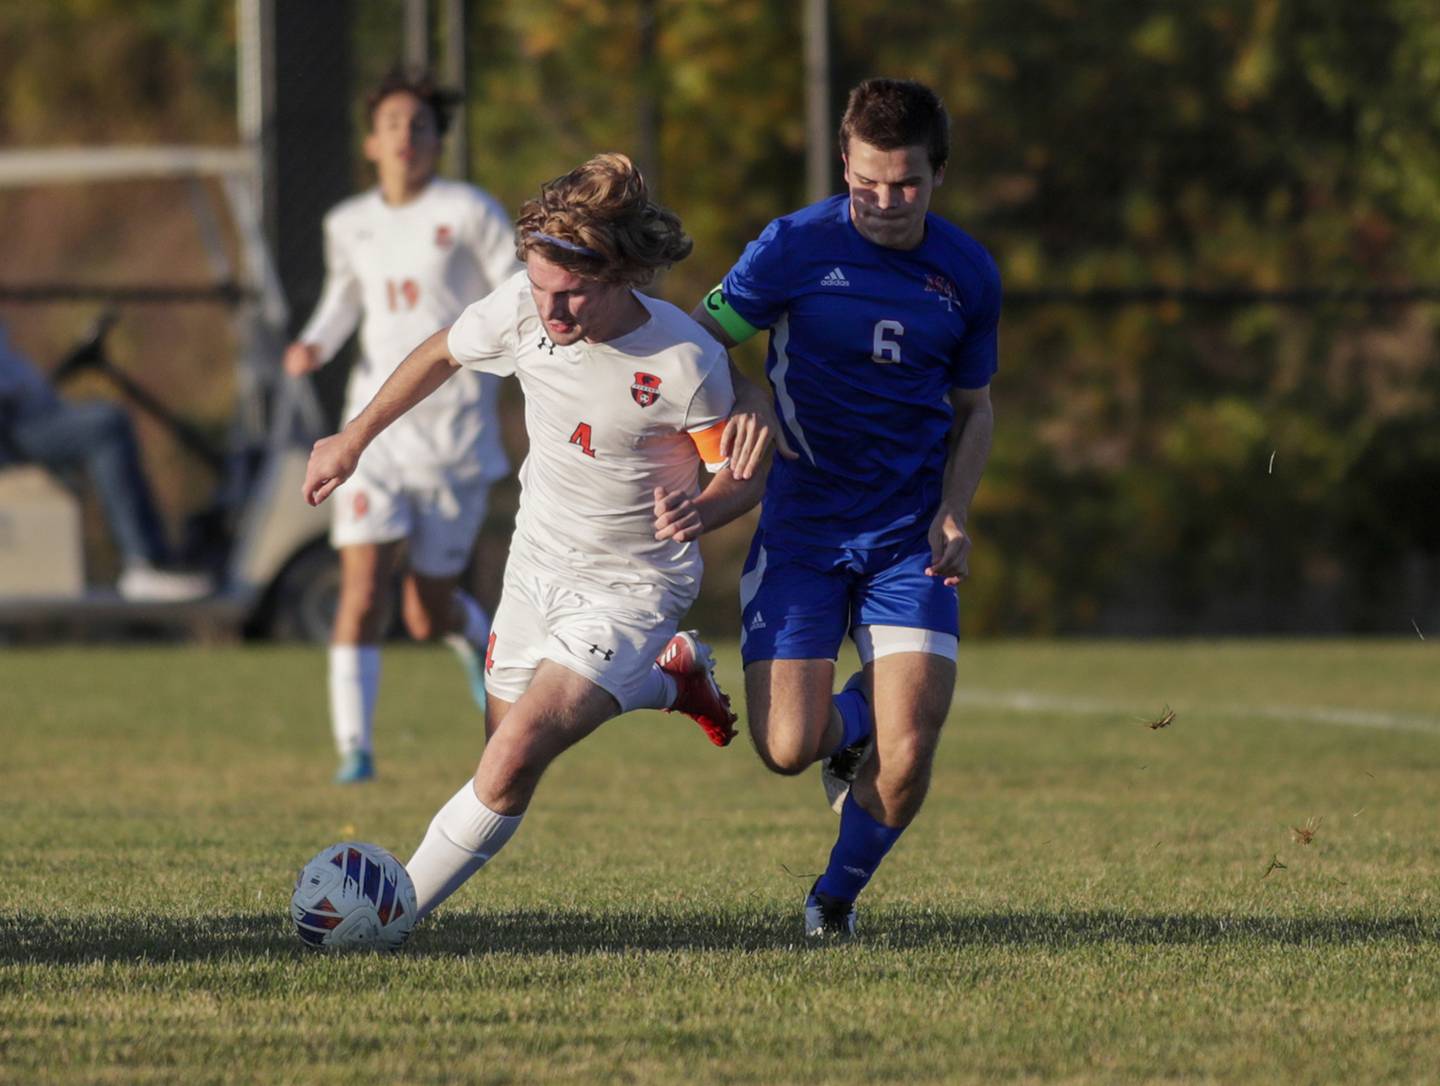 Oswego’s Ian Laird (4) moves the ball against Marmion’s Matthew Powell (6) during a nonconference game in Aurora on Wednesday, Oct. 12, 2022.